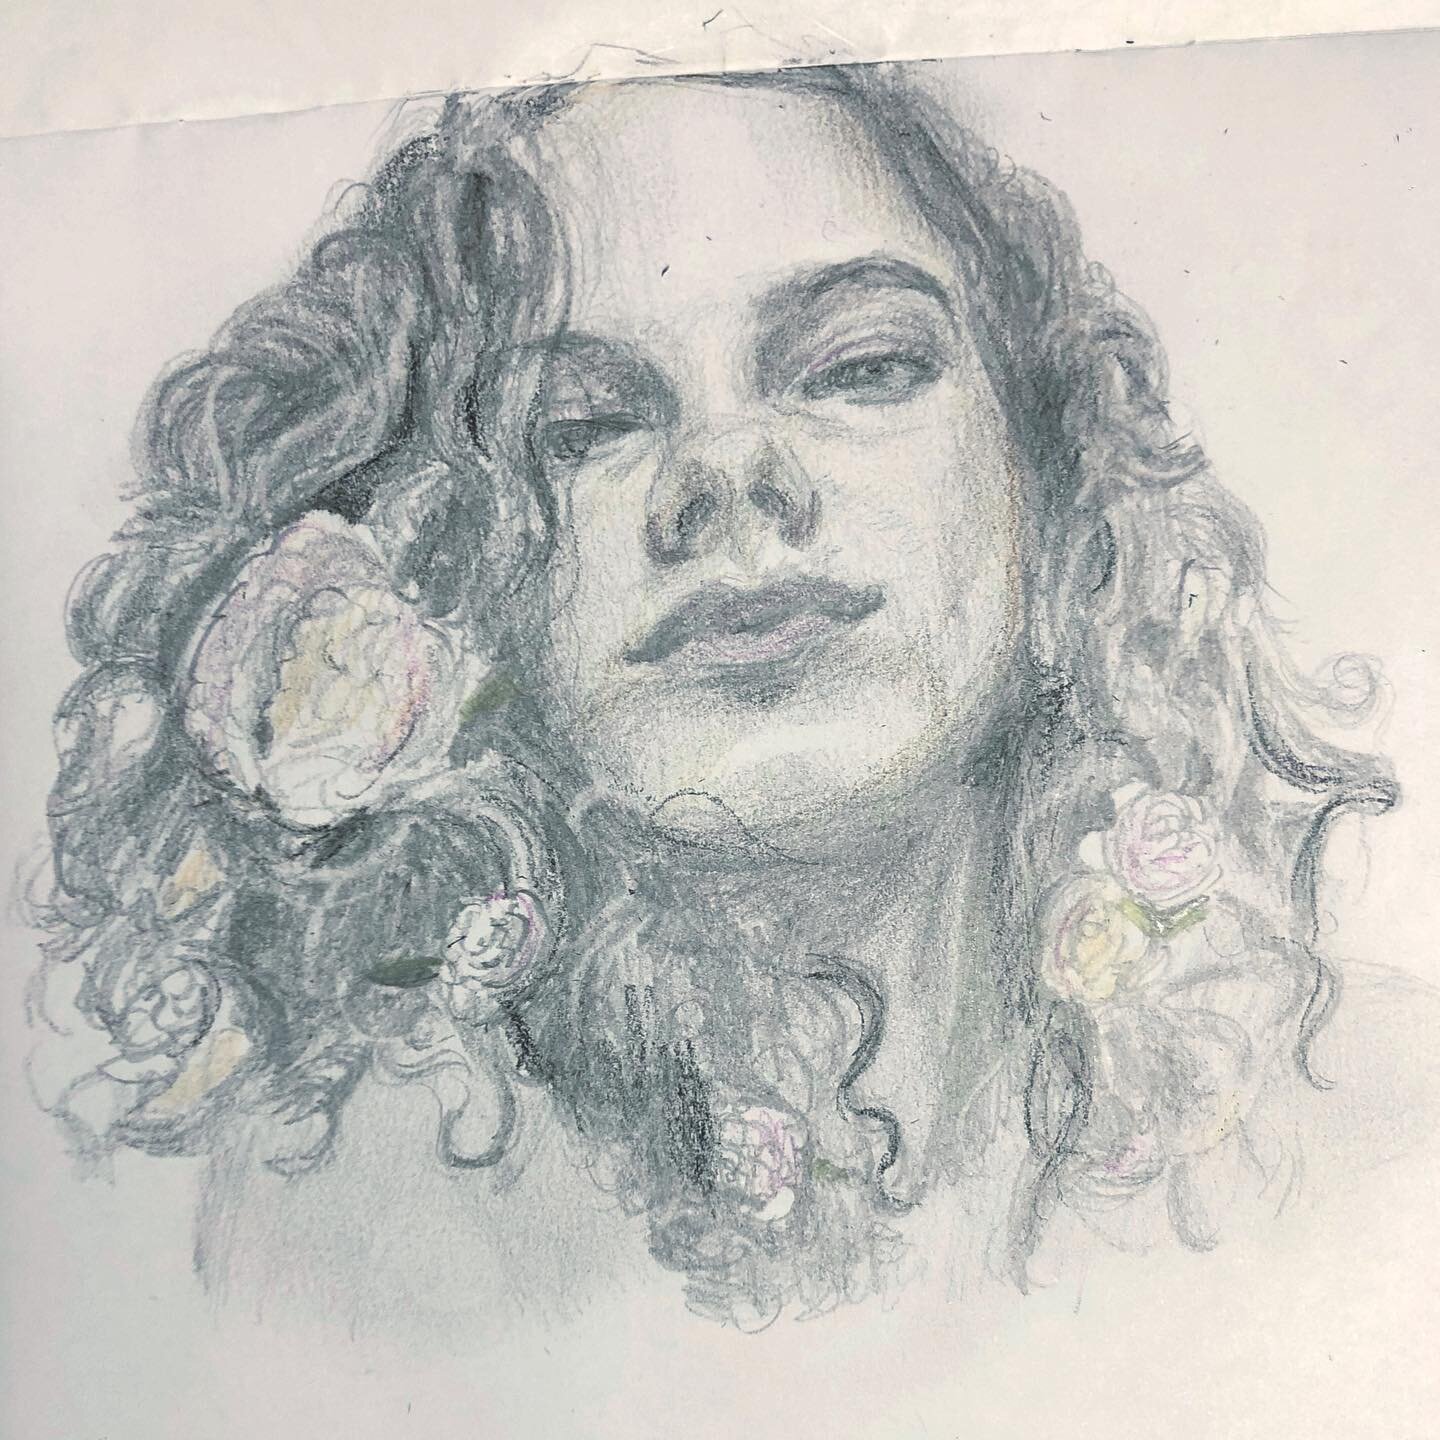 s a t u r d a y  s k e t c h 

A little pencil sketch working out an idea I have a for a new painting 🥀

#pencilsketchings #portraitprep #paintingprocess #ukportraitpainter #ukartist #artbynataliewilliamson